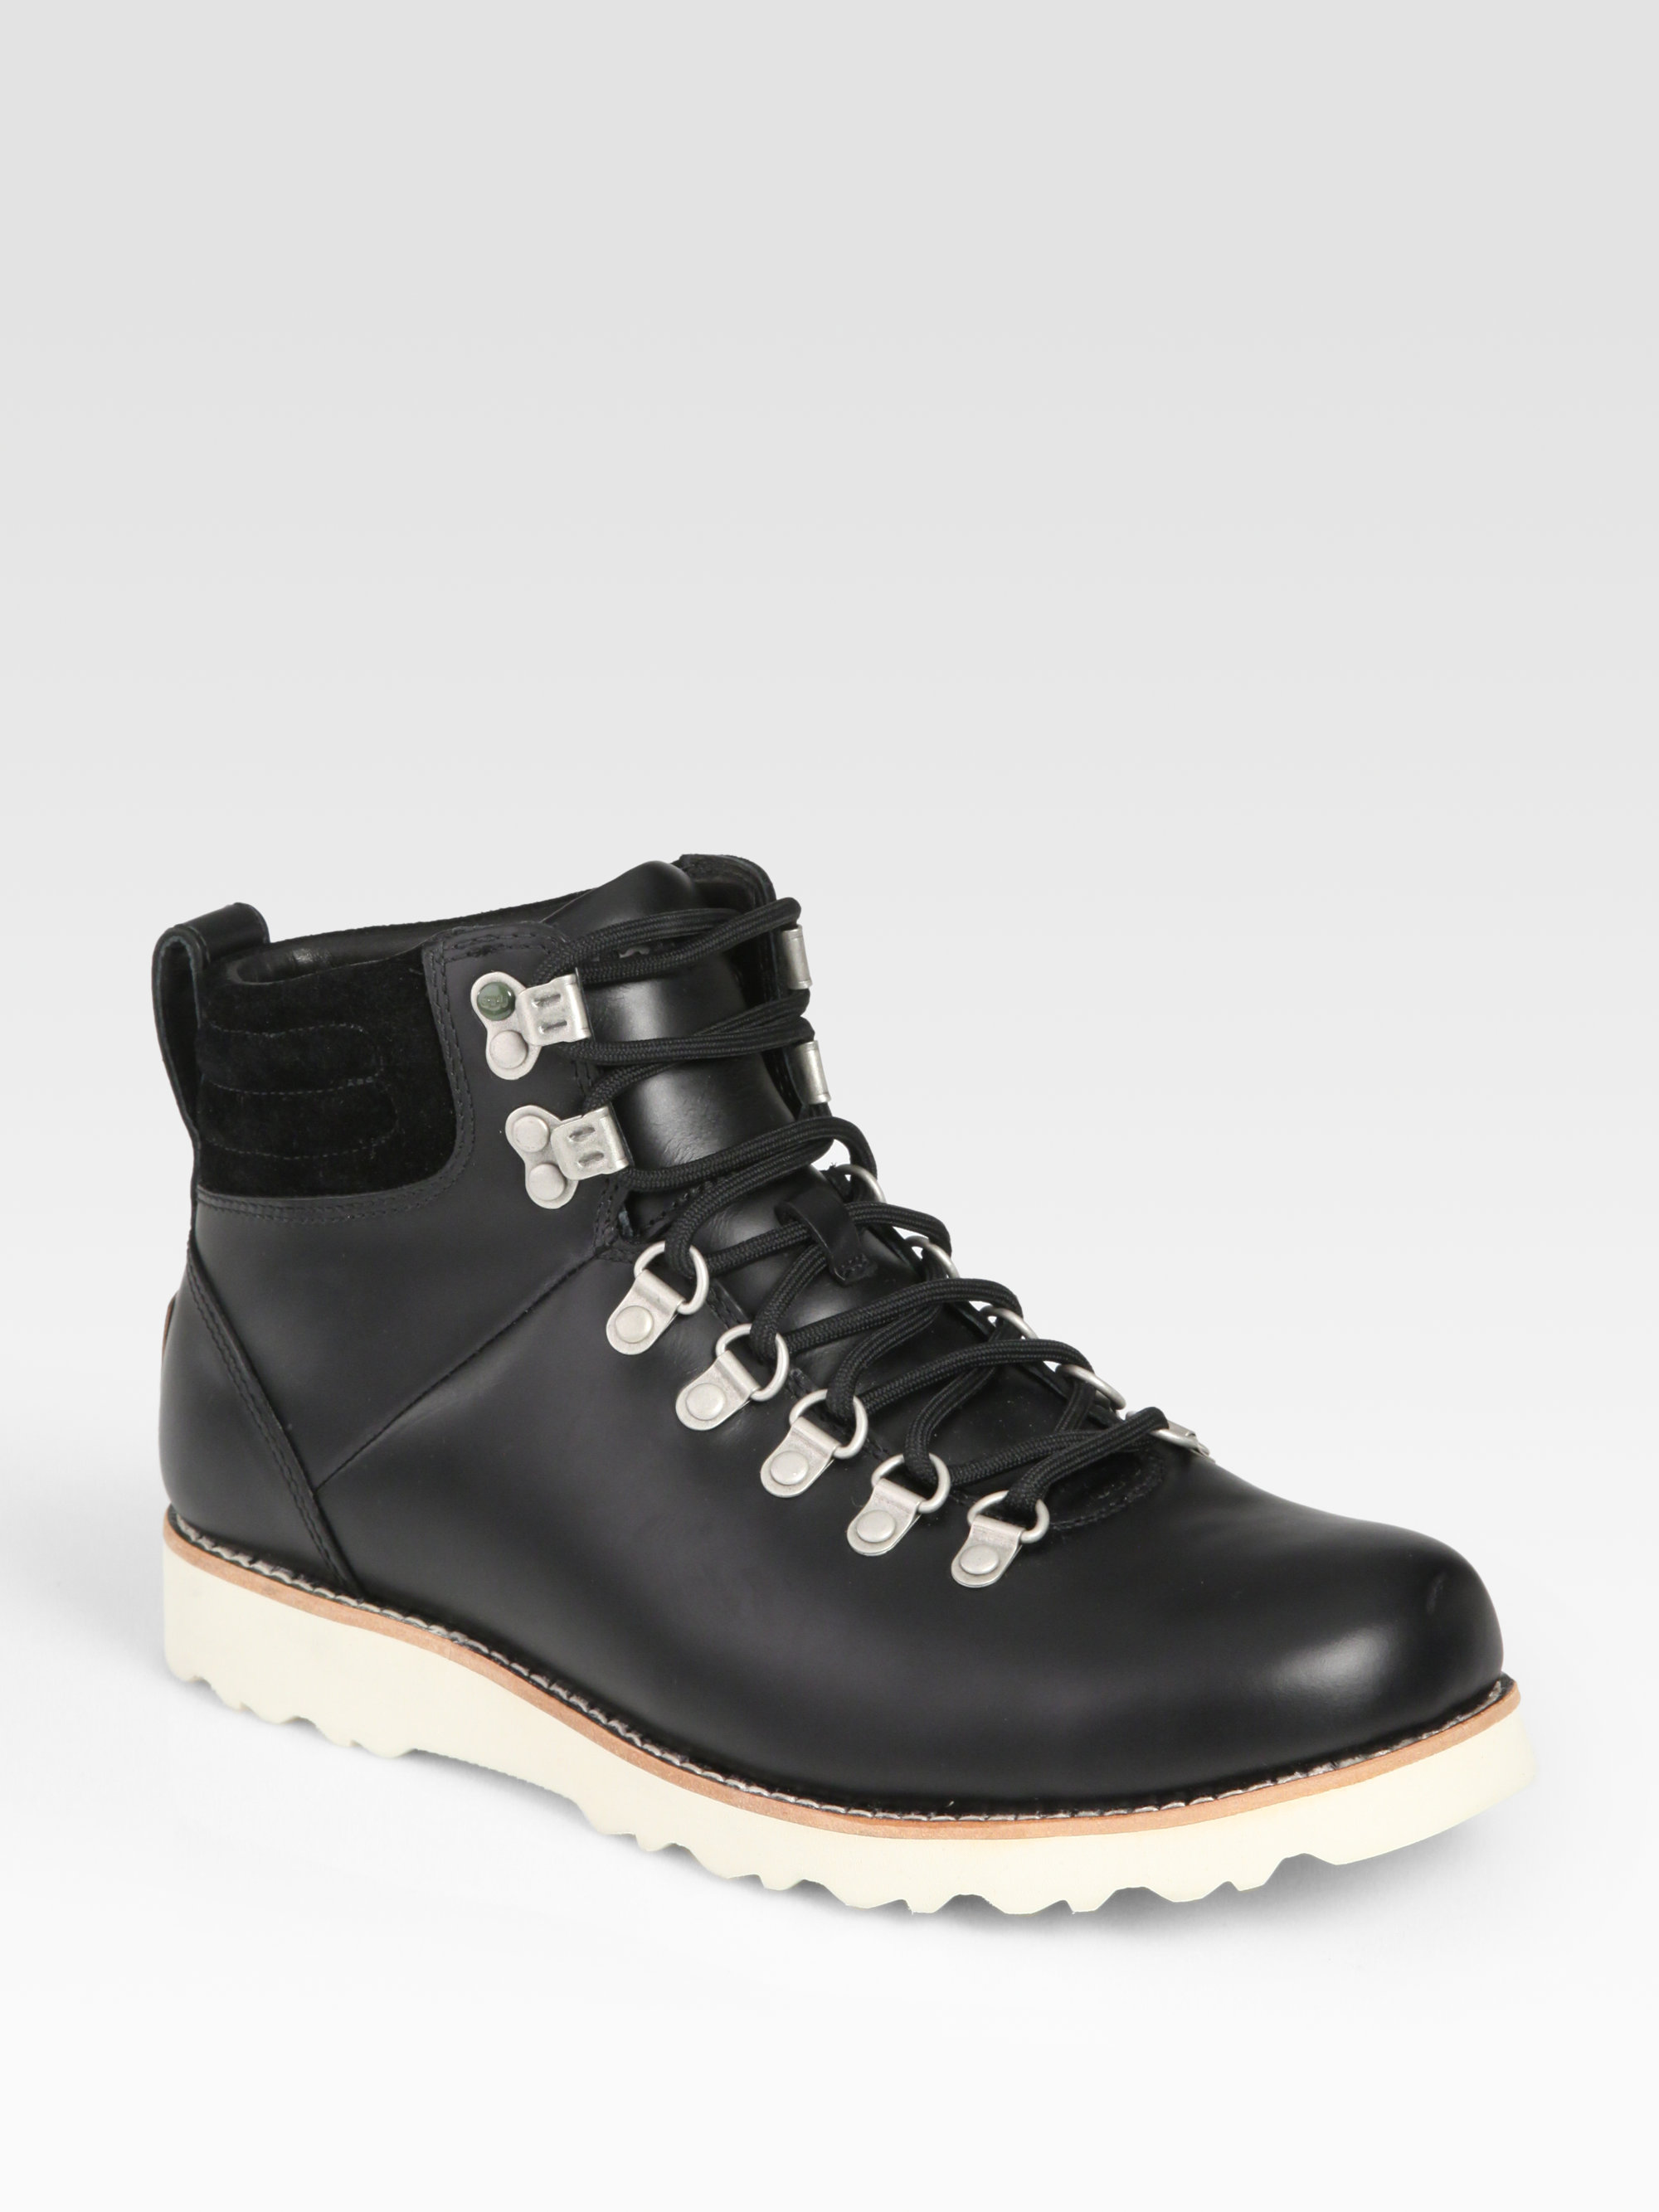 UGG Capulin Leather Boots in Black for Men - Lyst